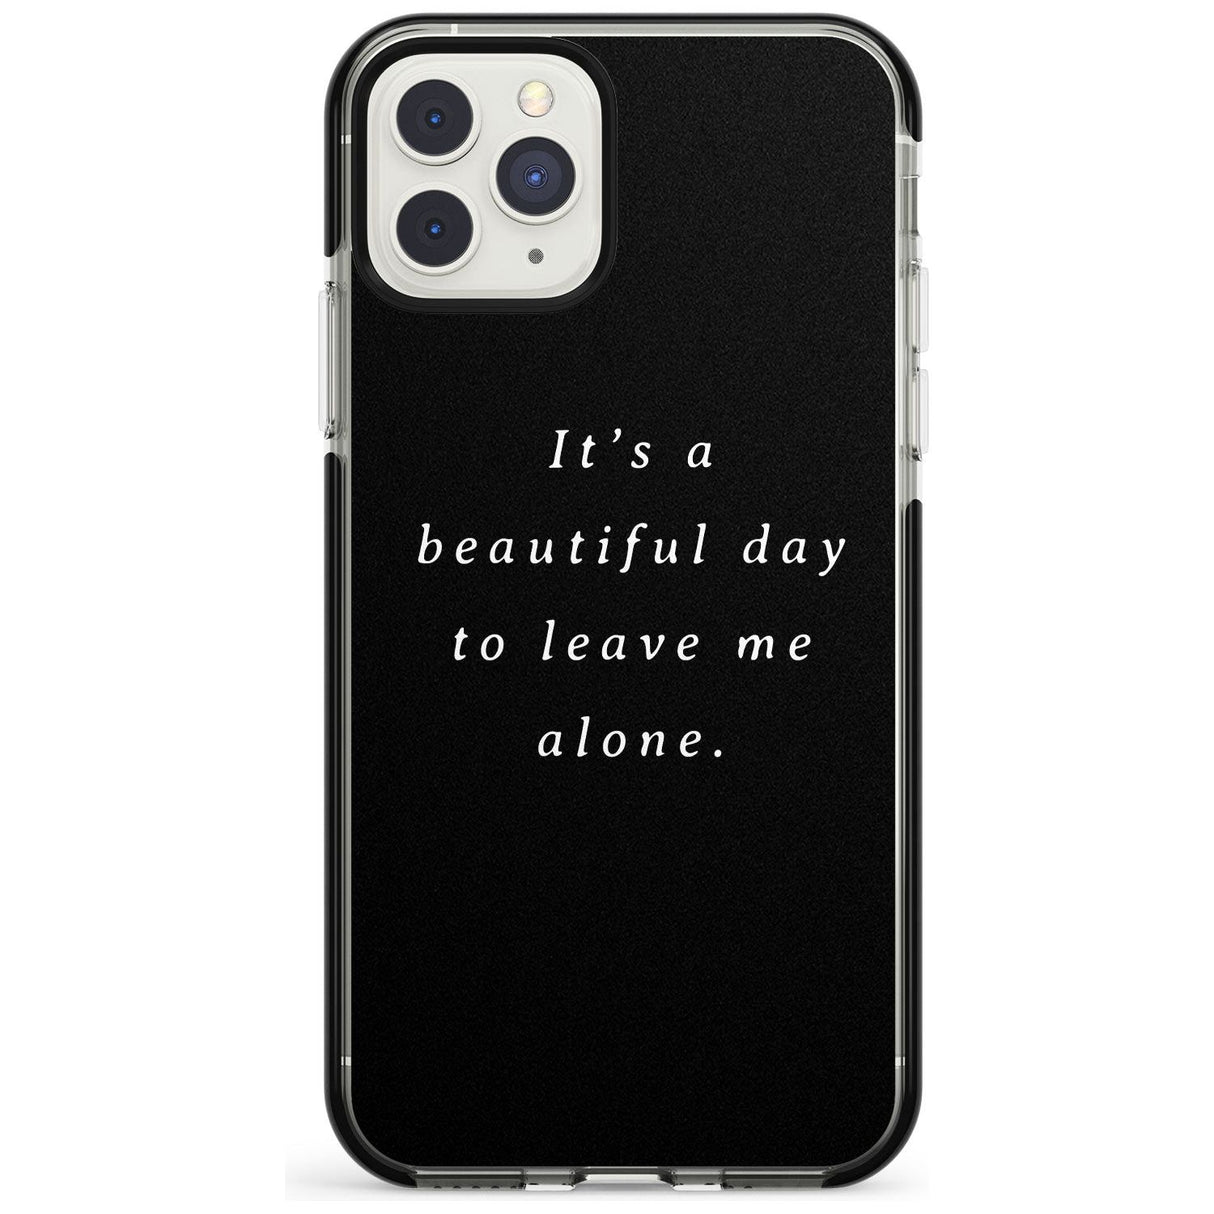 Leave me alone Black Impact Phone Case for iPhone 11 Pro Max